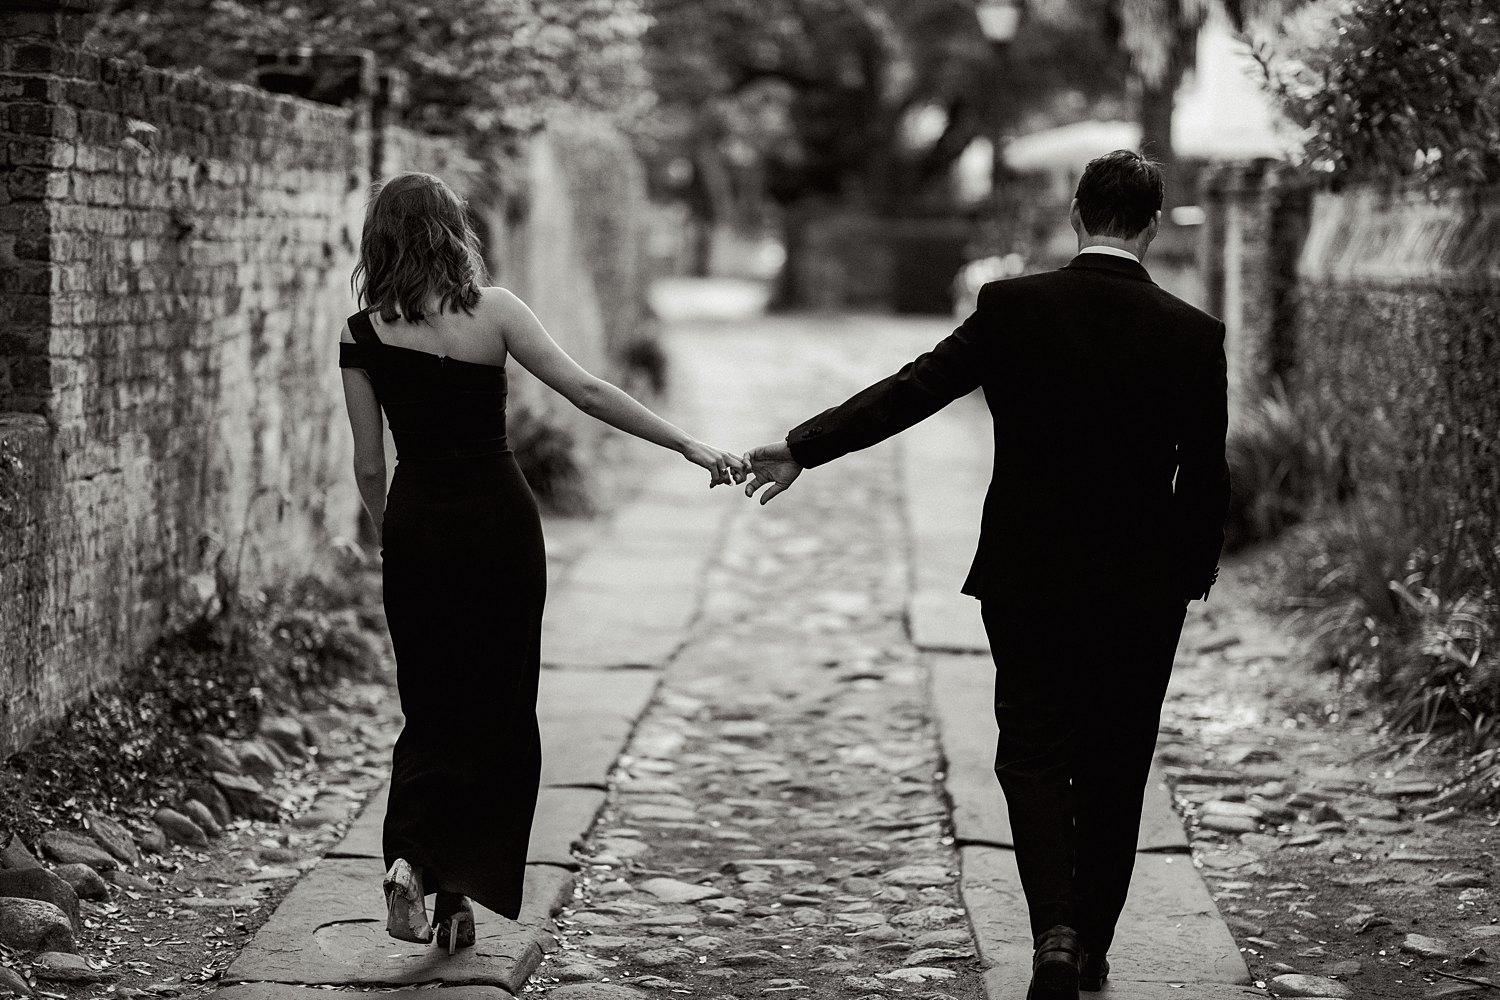 Man in tuxedo holding hands with woman in black dress walking down cobblestone alley and brick wall